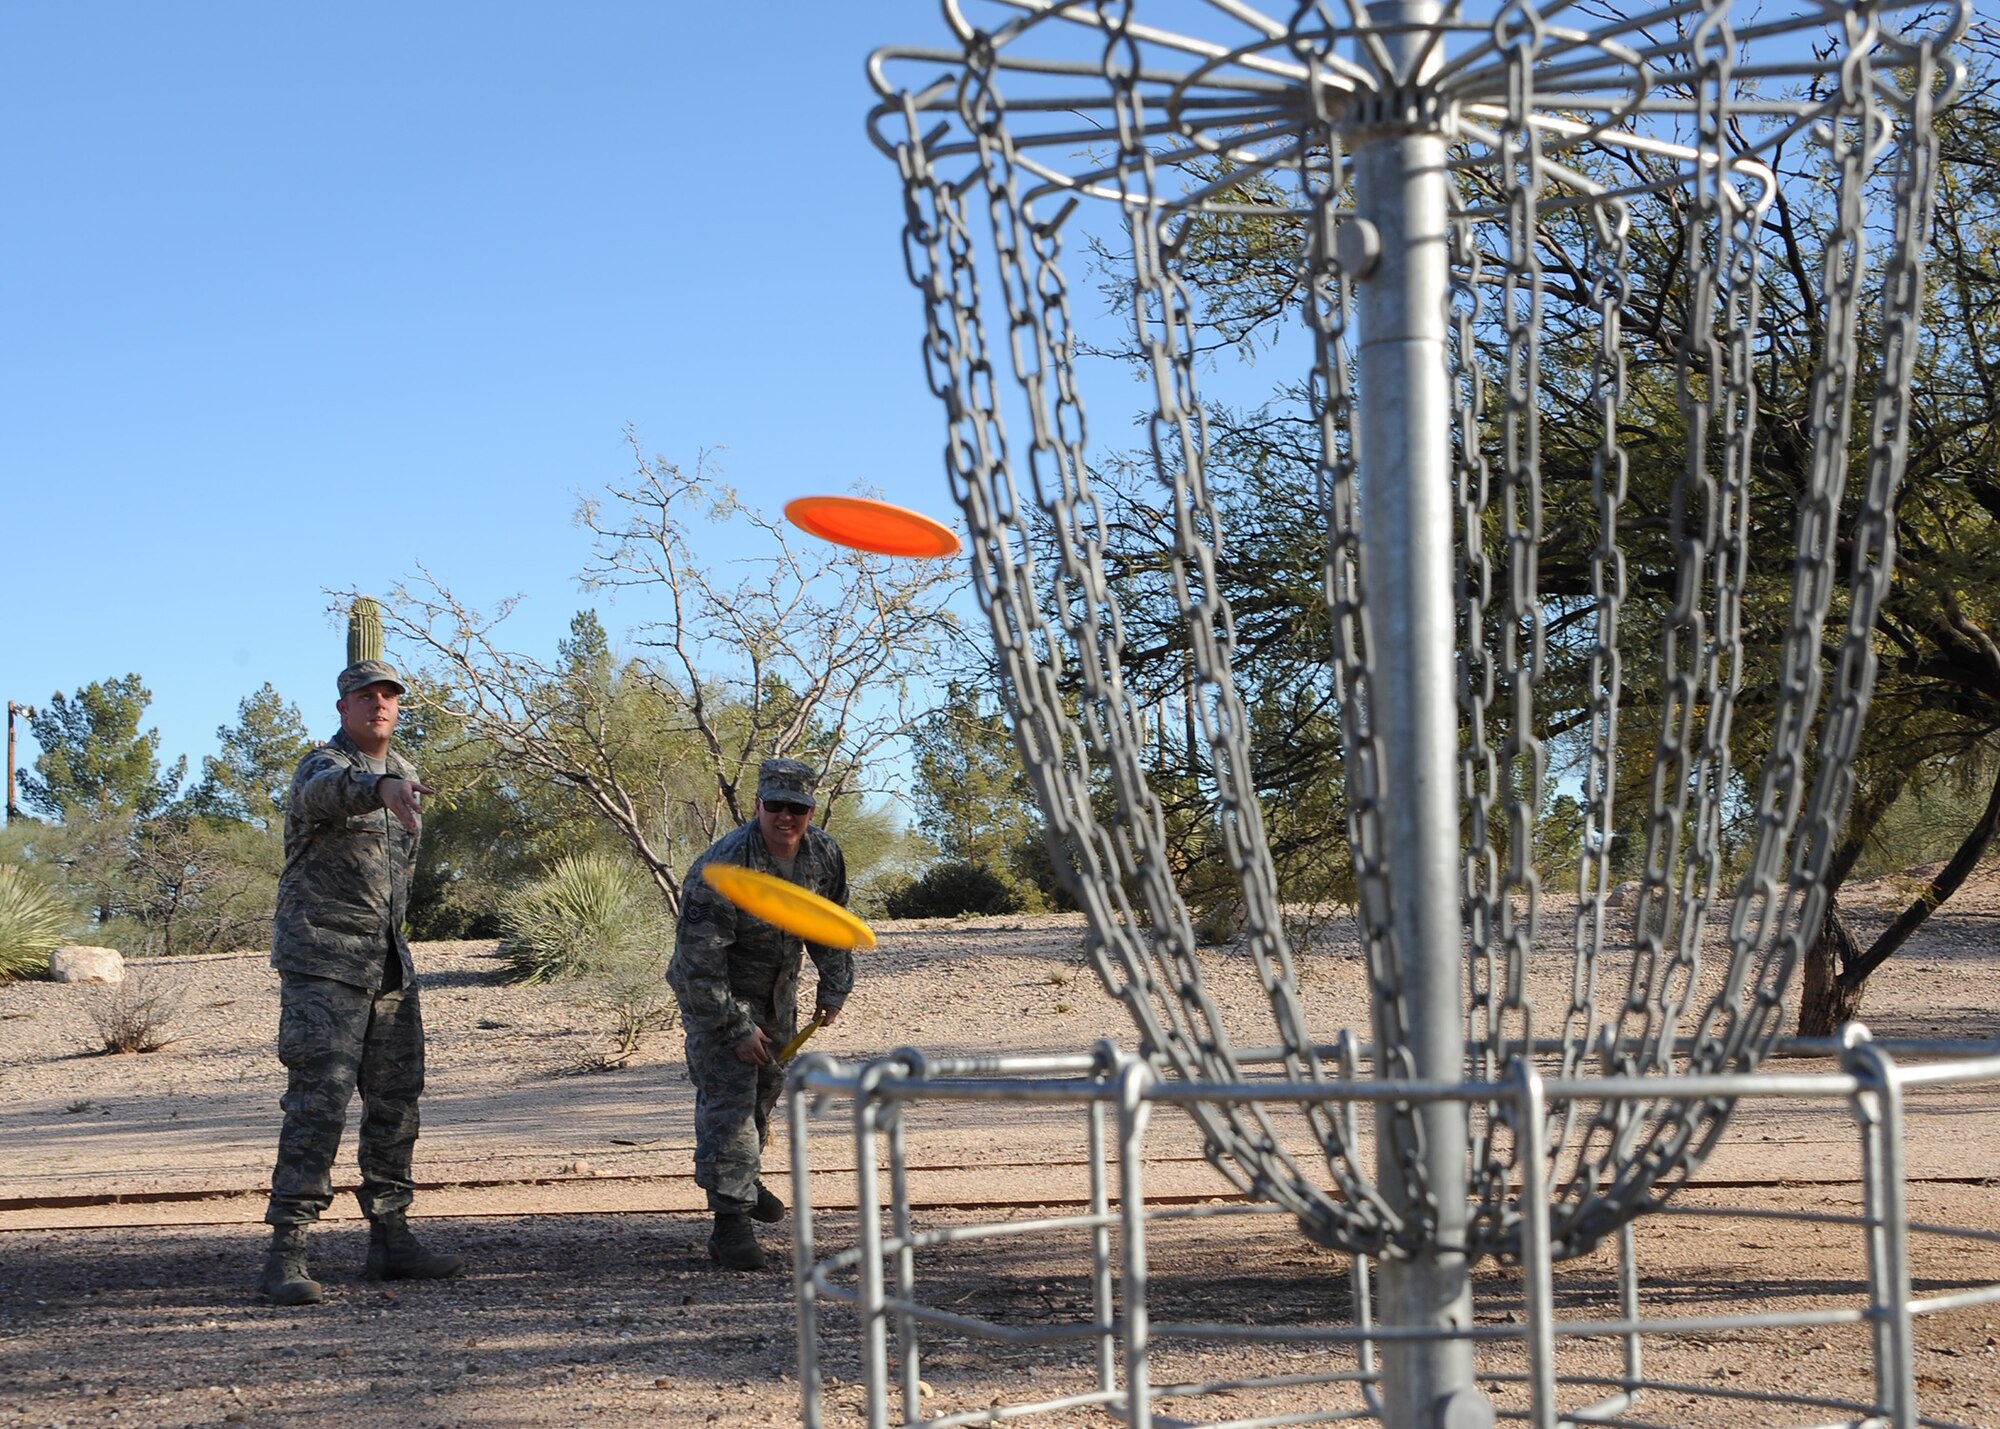 U.S. Air Force Tech. Sgt. Timothy Doub, 355th Electronic Maintenance Squadron C-130 isochronal maintenance lead technician, and Tech. Sgt. Donald Brown, 355th Electronic Maintenance Squadron C-130 dock coordinator, toss discs into the disc golf target basket near the future disc golf course site at Davis-Monthan Air Force Base, Ariz., Feb. 10, 2016. The two designed a course and presented their idea at the InnovateDLT event, which gave Airmen a direct line to the base commander and allowed them to propose an improvement that will impact members of the base. (U.S. Air Force photo by Airmen 1st Class Ashley N. Steffen/Released) 